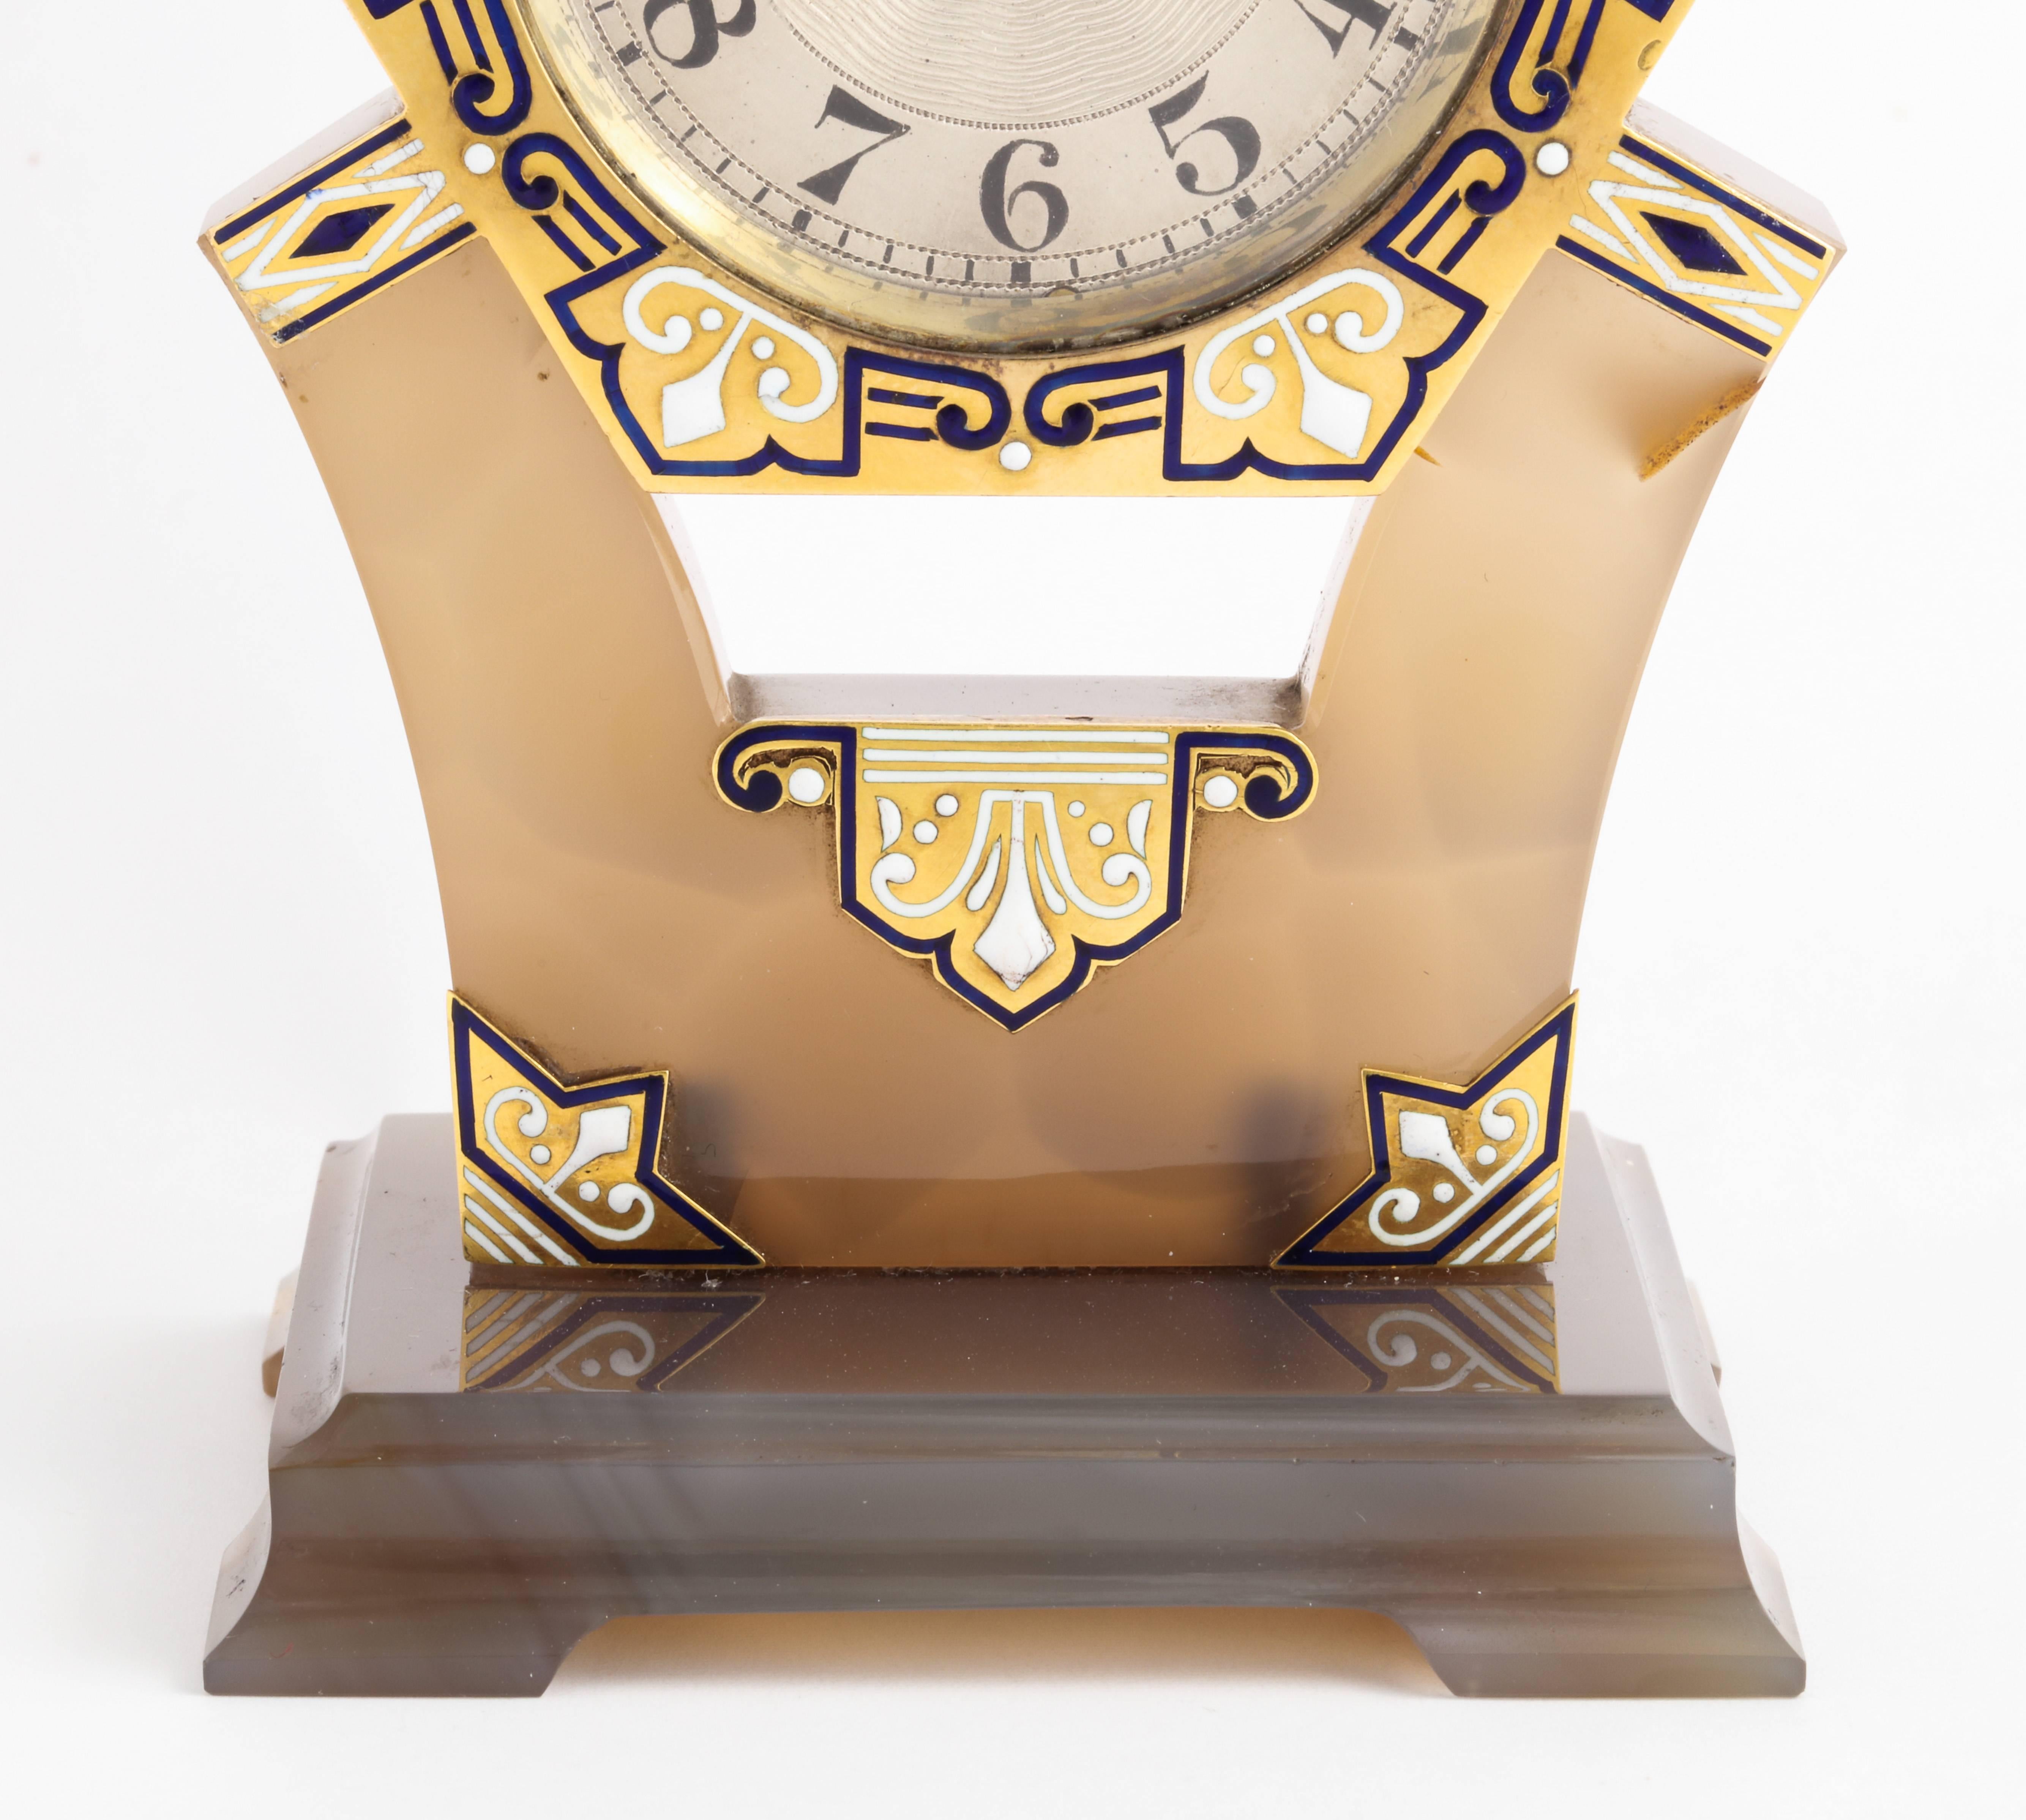 Art Deco Tiffany and Co Clock  

Comprised of: gold, silver, carved hardstone, old cut diamonds, and blue and white enamel.

Made circa 1925

Dial signed Tiffany & Co. French maker's Mark stamps

Depicted in full page spread in the 